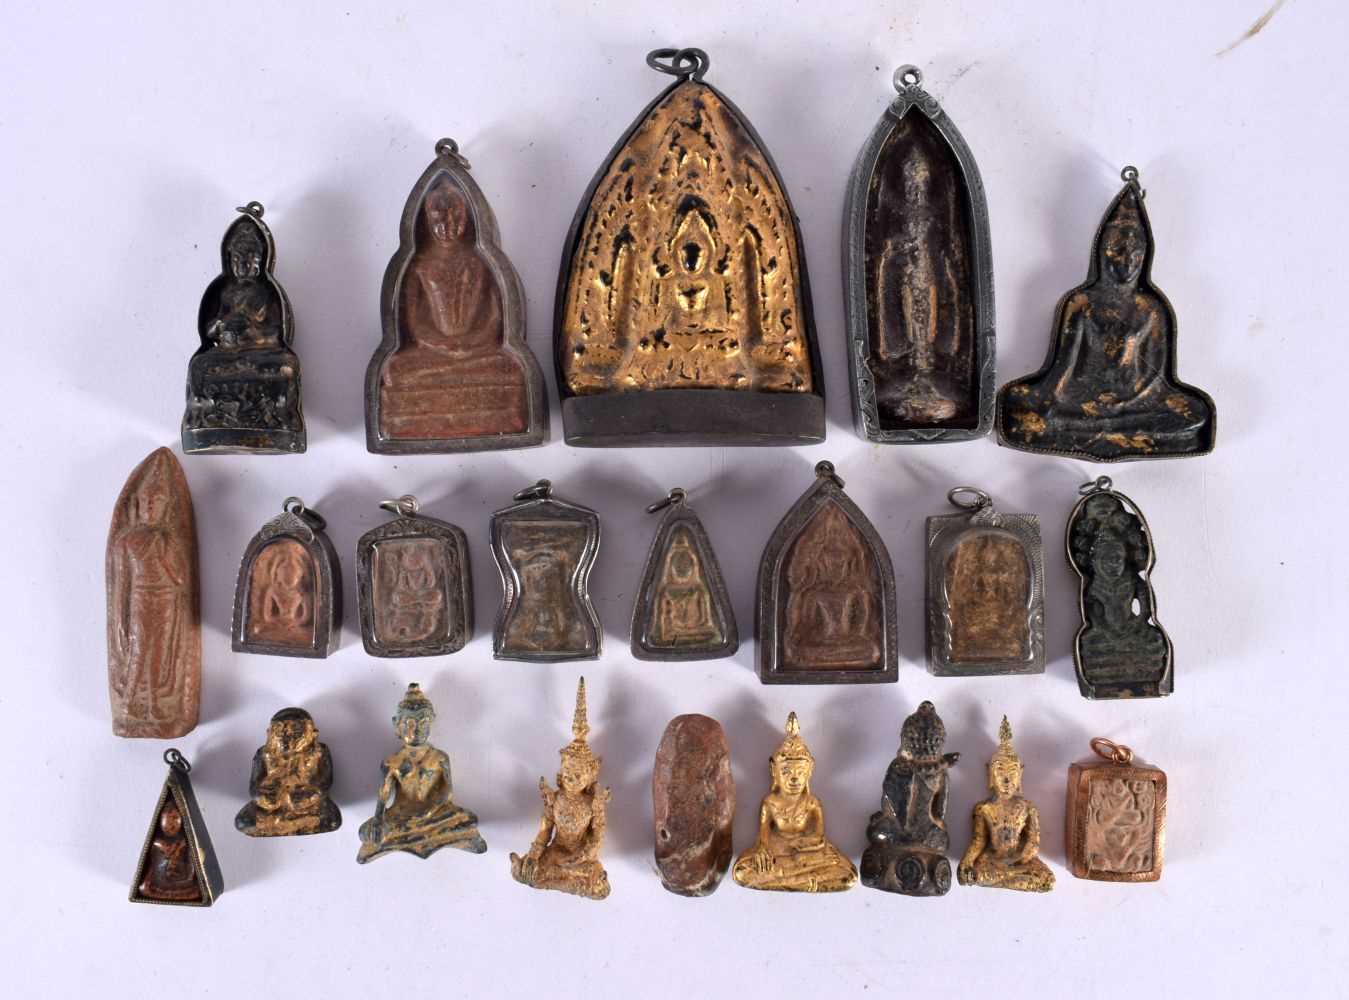 A GROUP OF 18TH/19TH CENTURY SOUTHEAST ASIAN BRONZE BUDDHA PLAQUES in various forms and sizes.